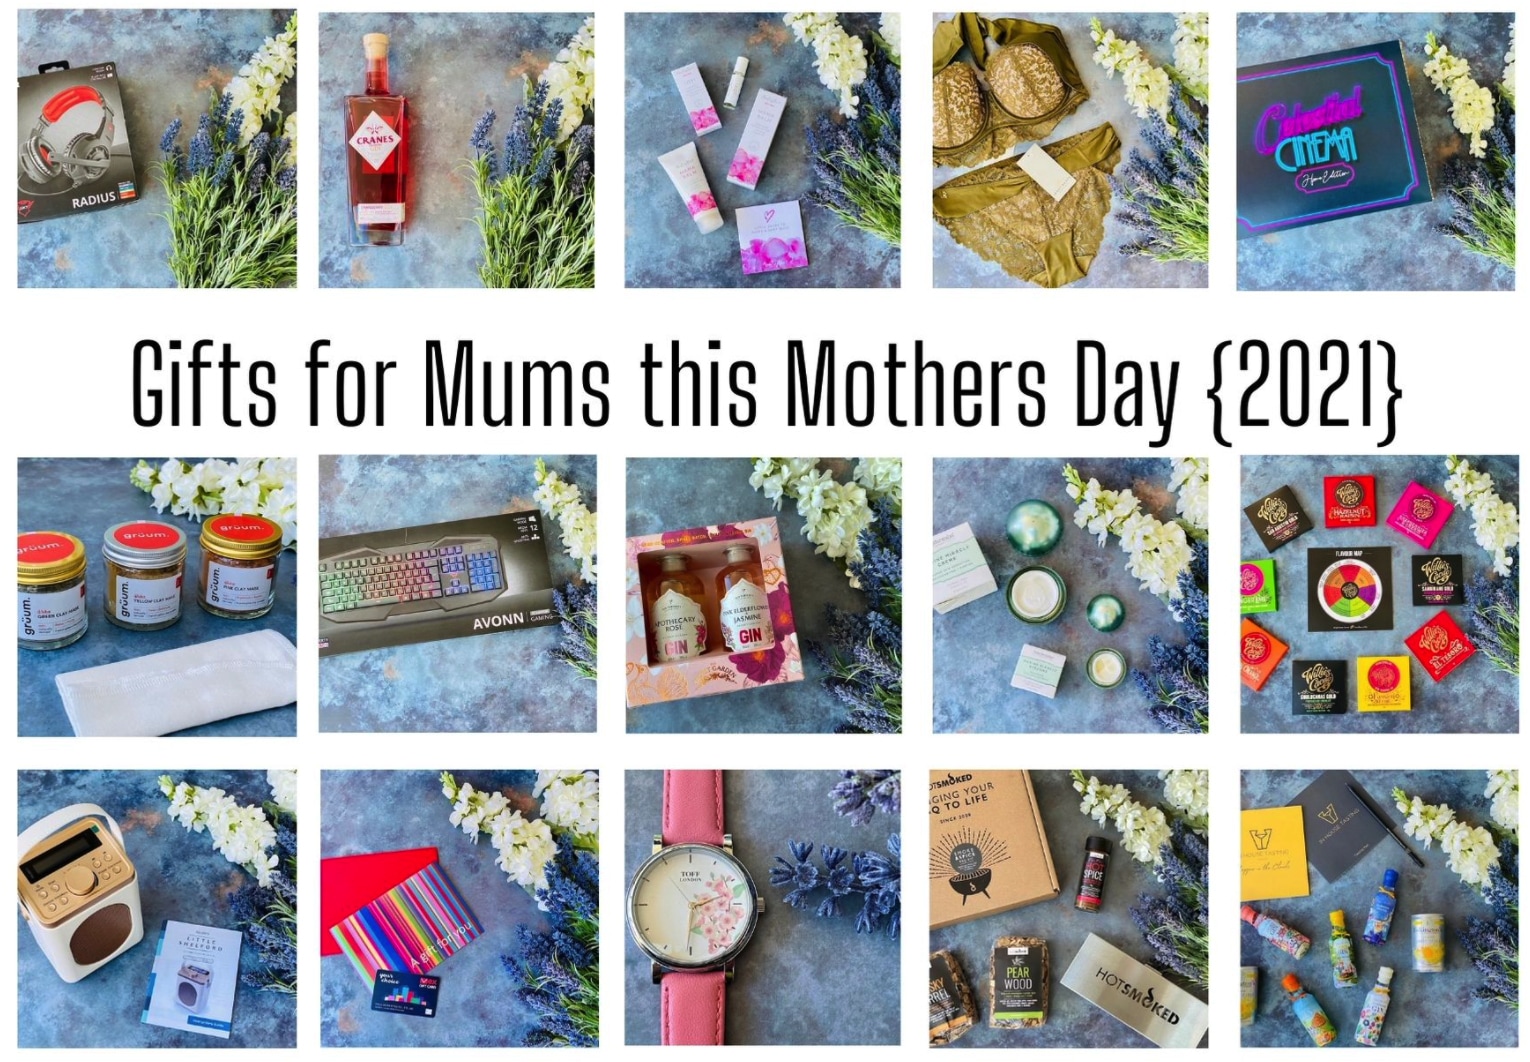 Gifts for Mums this Mothers Day 2021